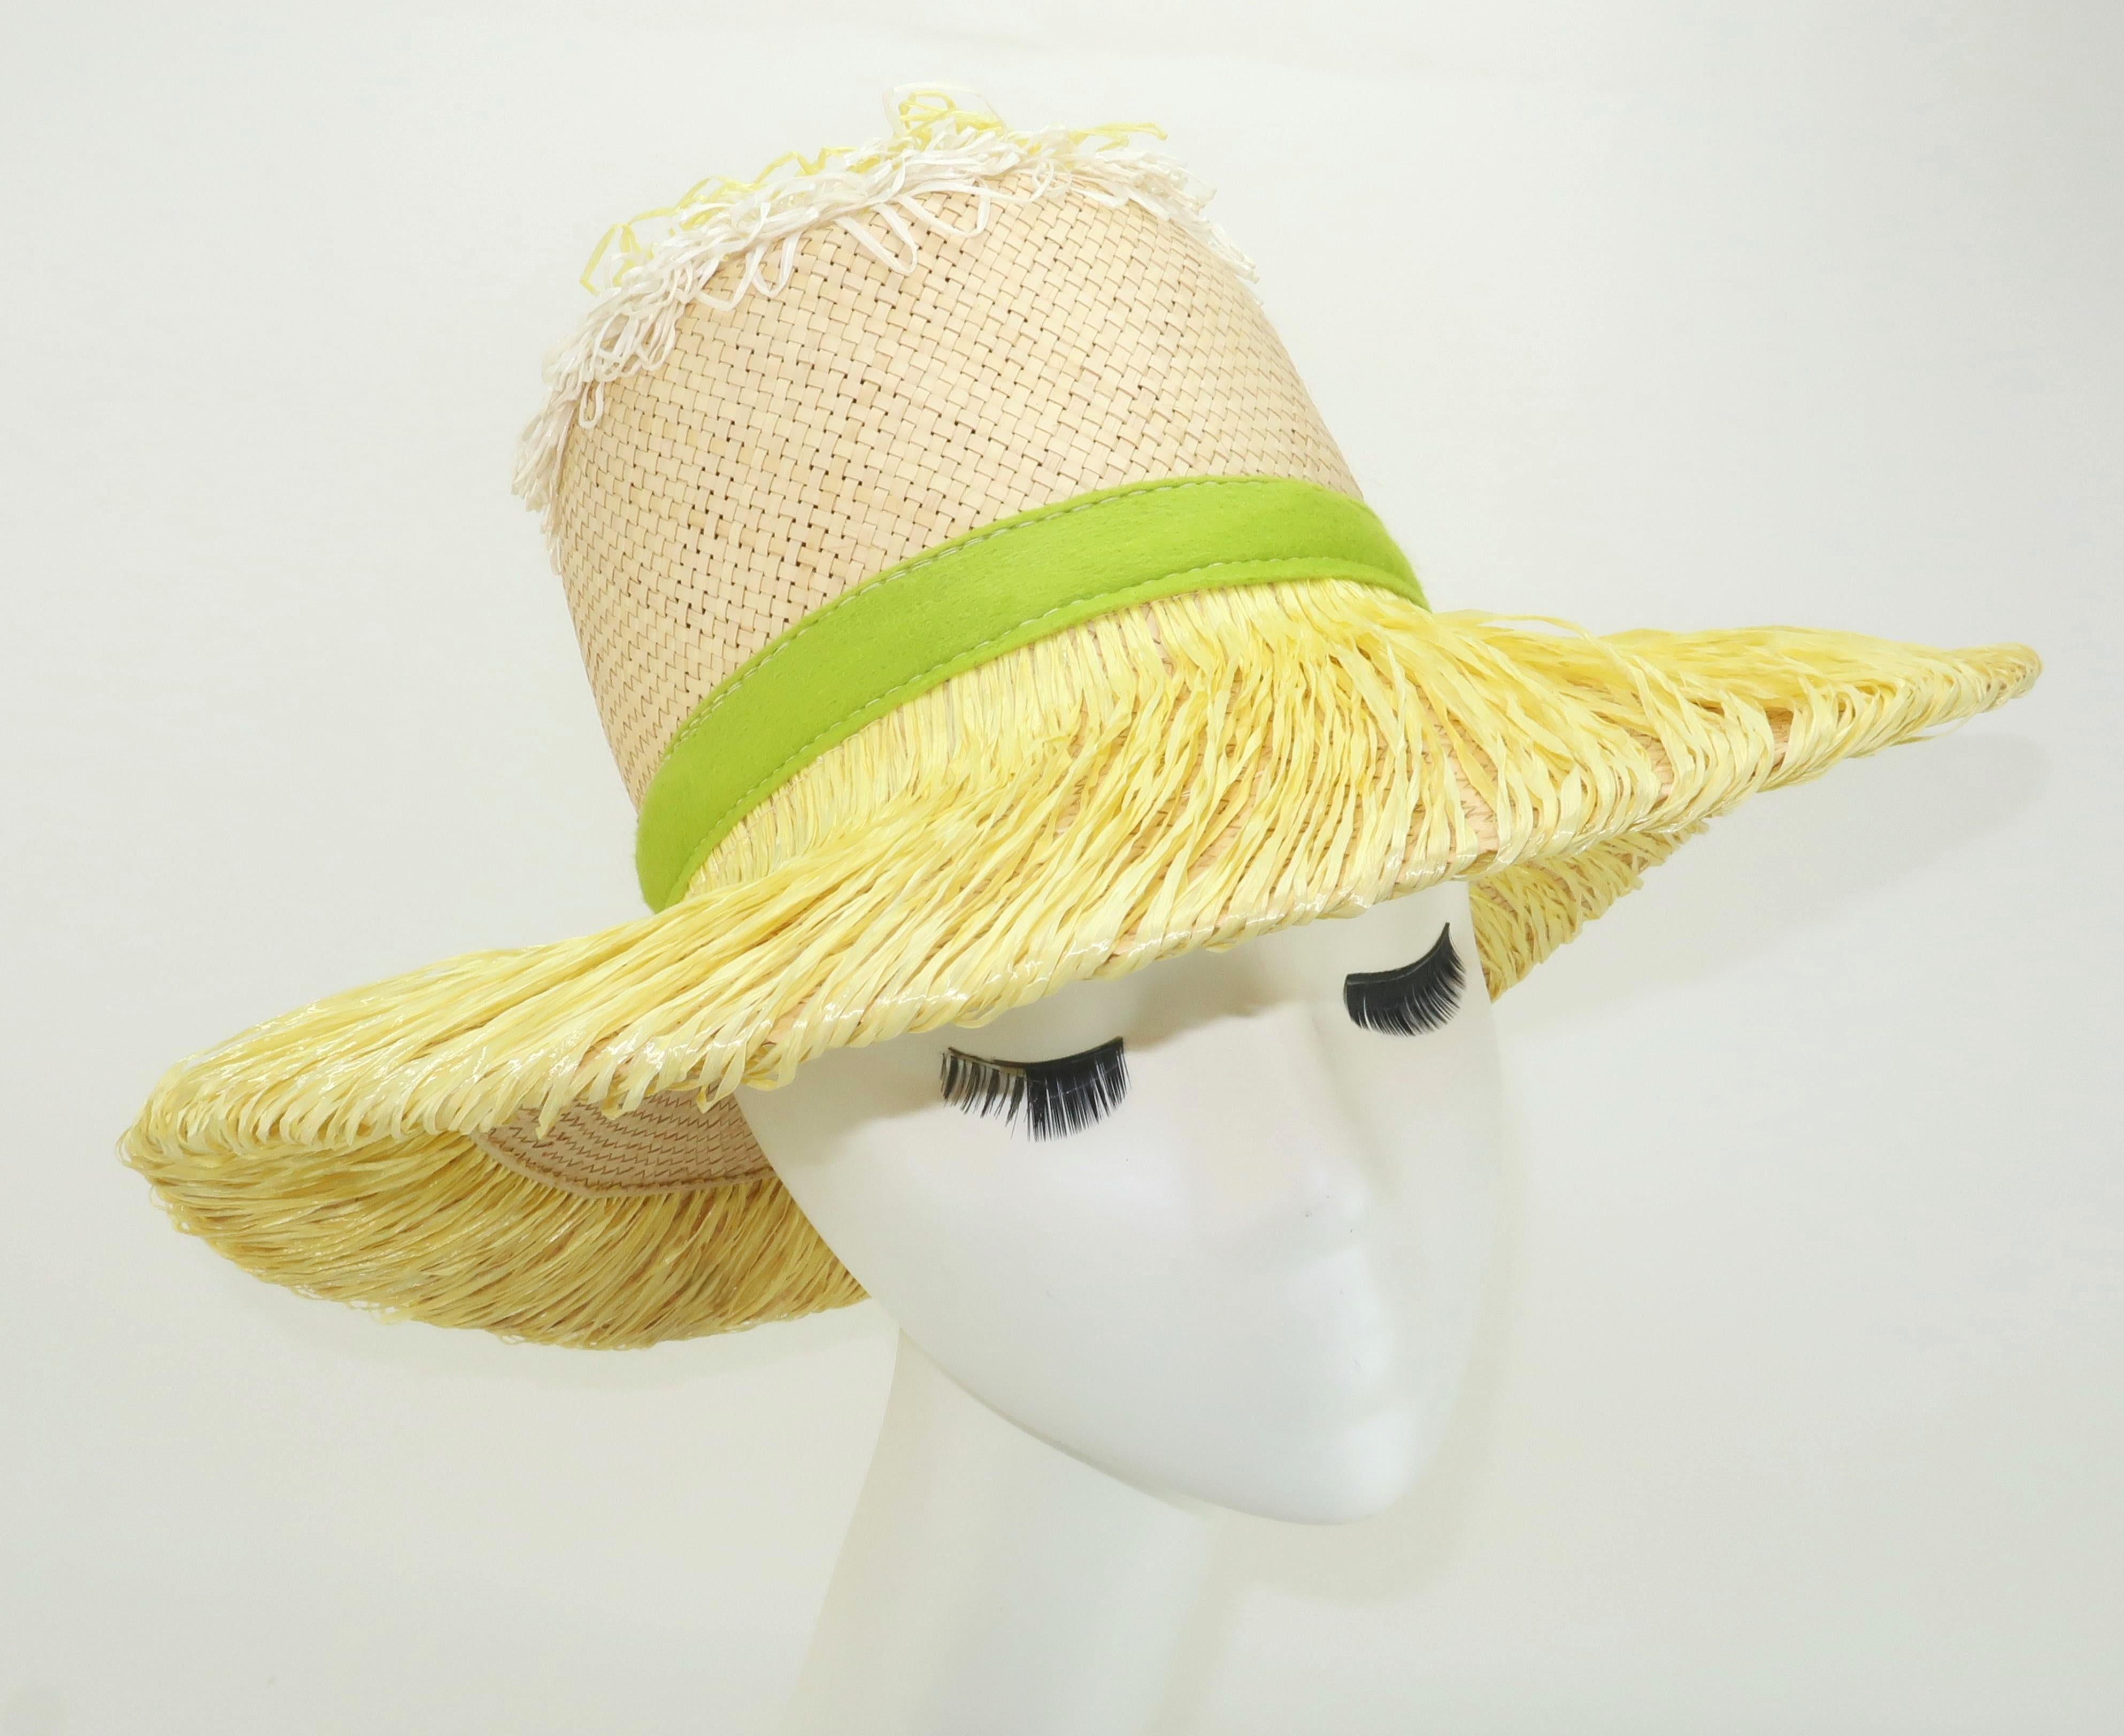 It's time for a little fun in the sun! 1960's Italian straw hat with a wide brim and whimsical yellow and white raffia decoration, including a green felt band, all in a sunflower motif.  The lightweight weave of the straw provides cooling